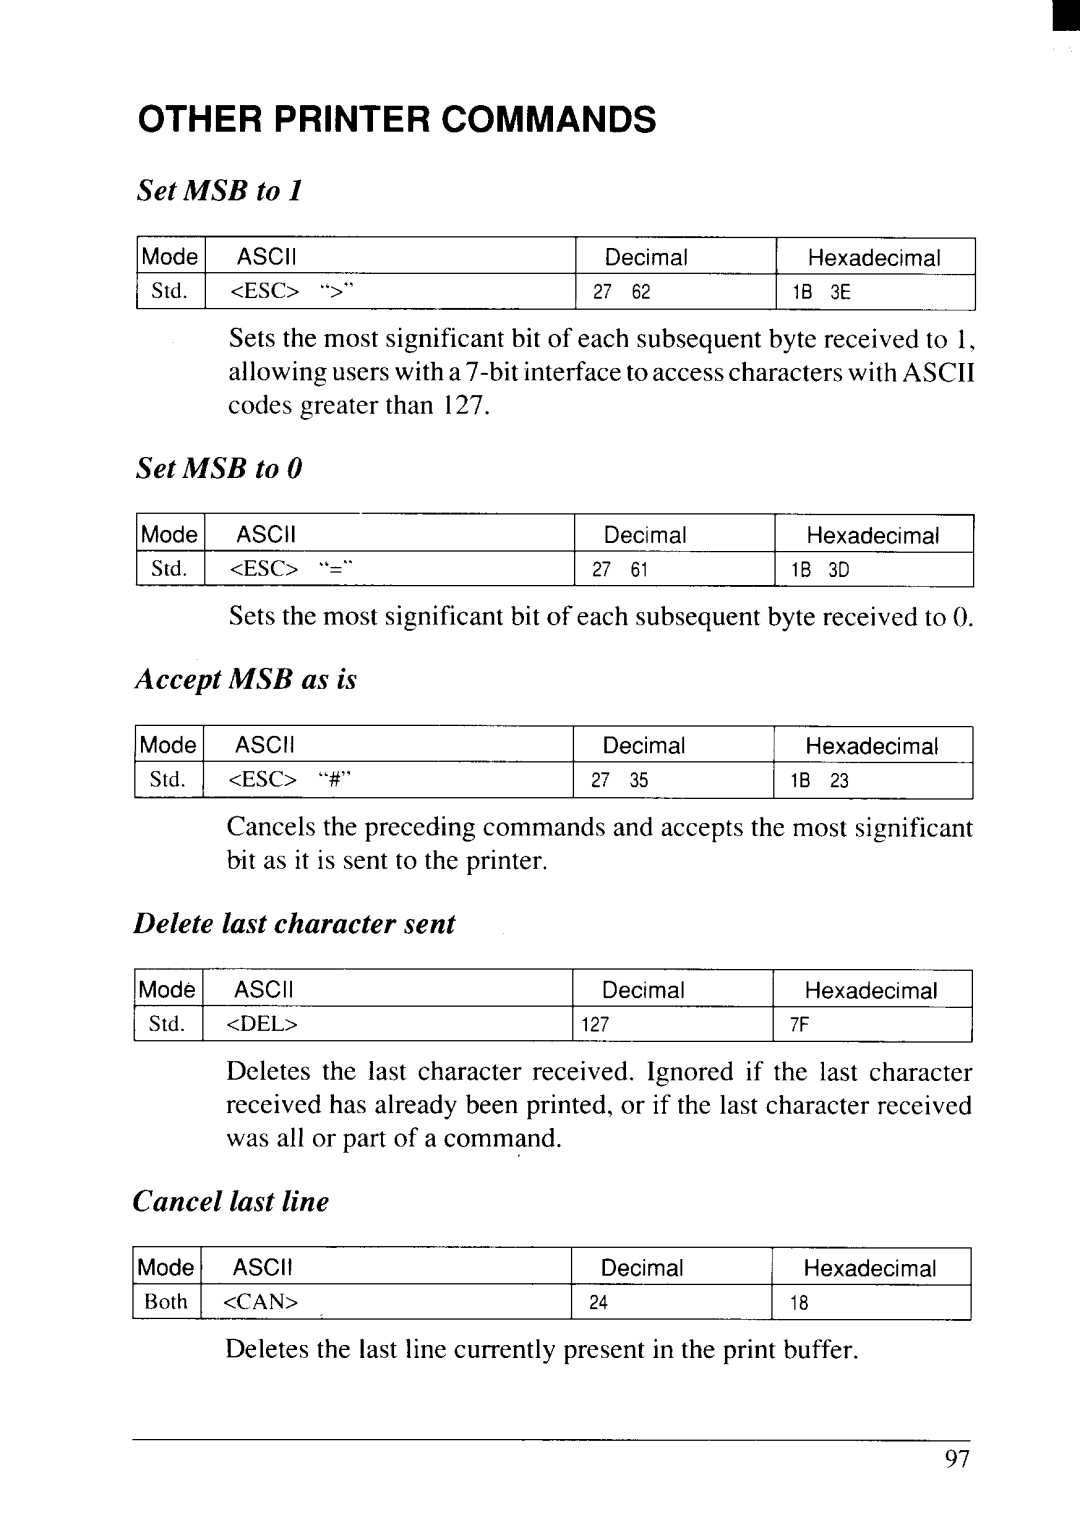 Star Micronics NX-2415II user manual Other Printer Commands, Set MSB to O, Accept MSB as is, Delete last character sent 